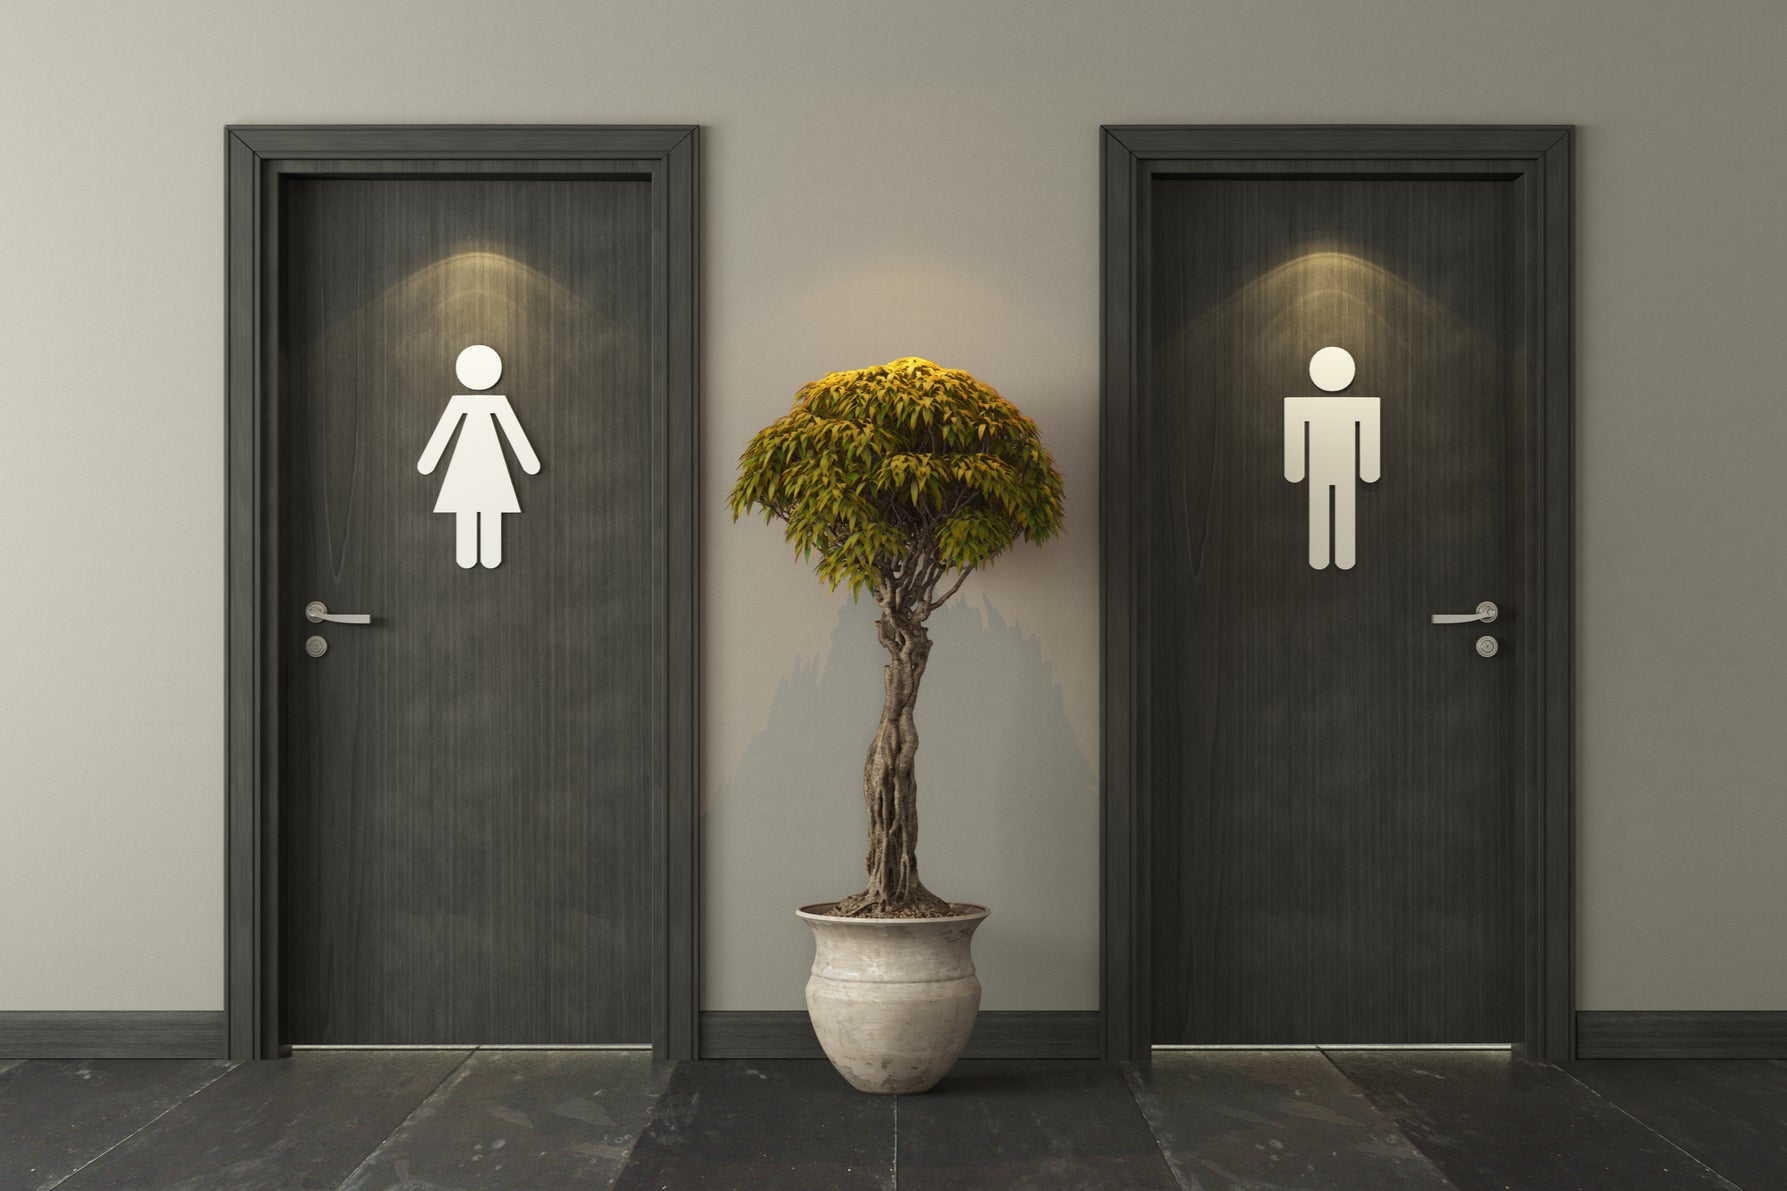 To pee or not to pee: the UK’s public toilet situation is in serious need of improvement